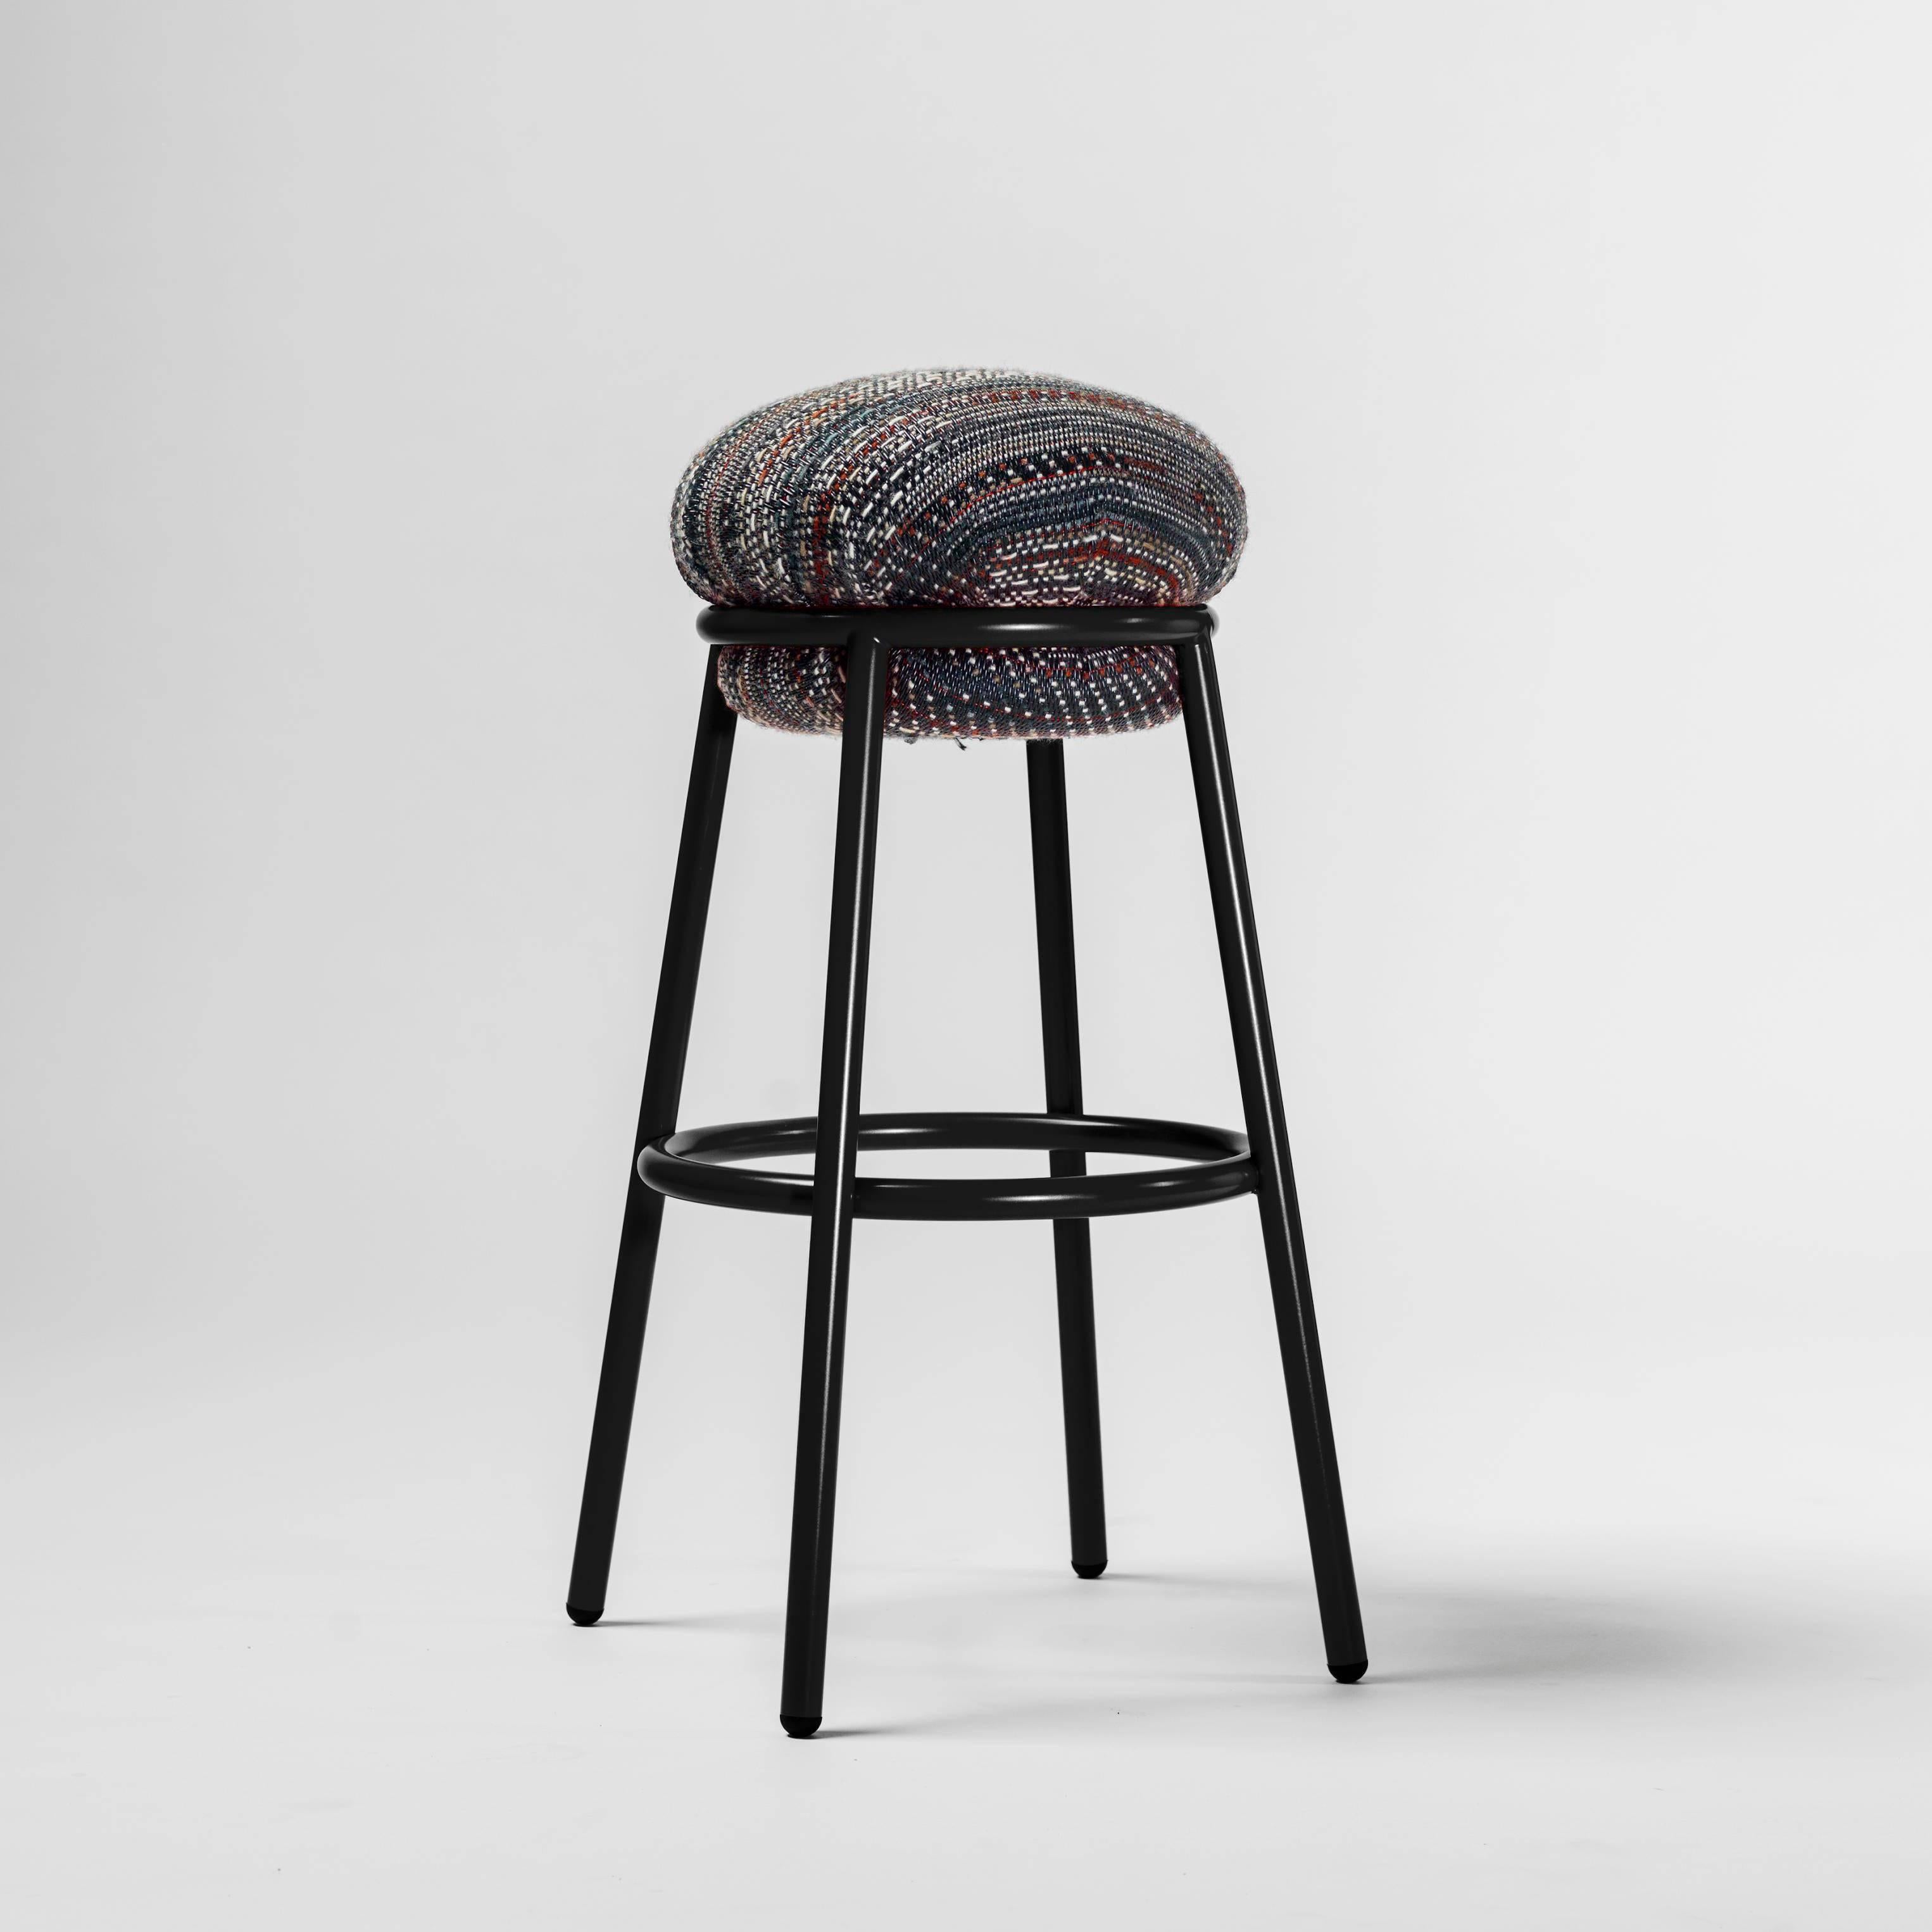 Bar Stool designed by Stephen Burks manufactured by BD

An iron tubular (25mm) structured armchair. Seat and backrest upholstered in fabric.

The fabric upholstery oozes over the bare iron structure. 

Measure: Ø36 x H 80 cm

Year: 2018.